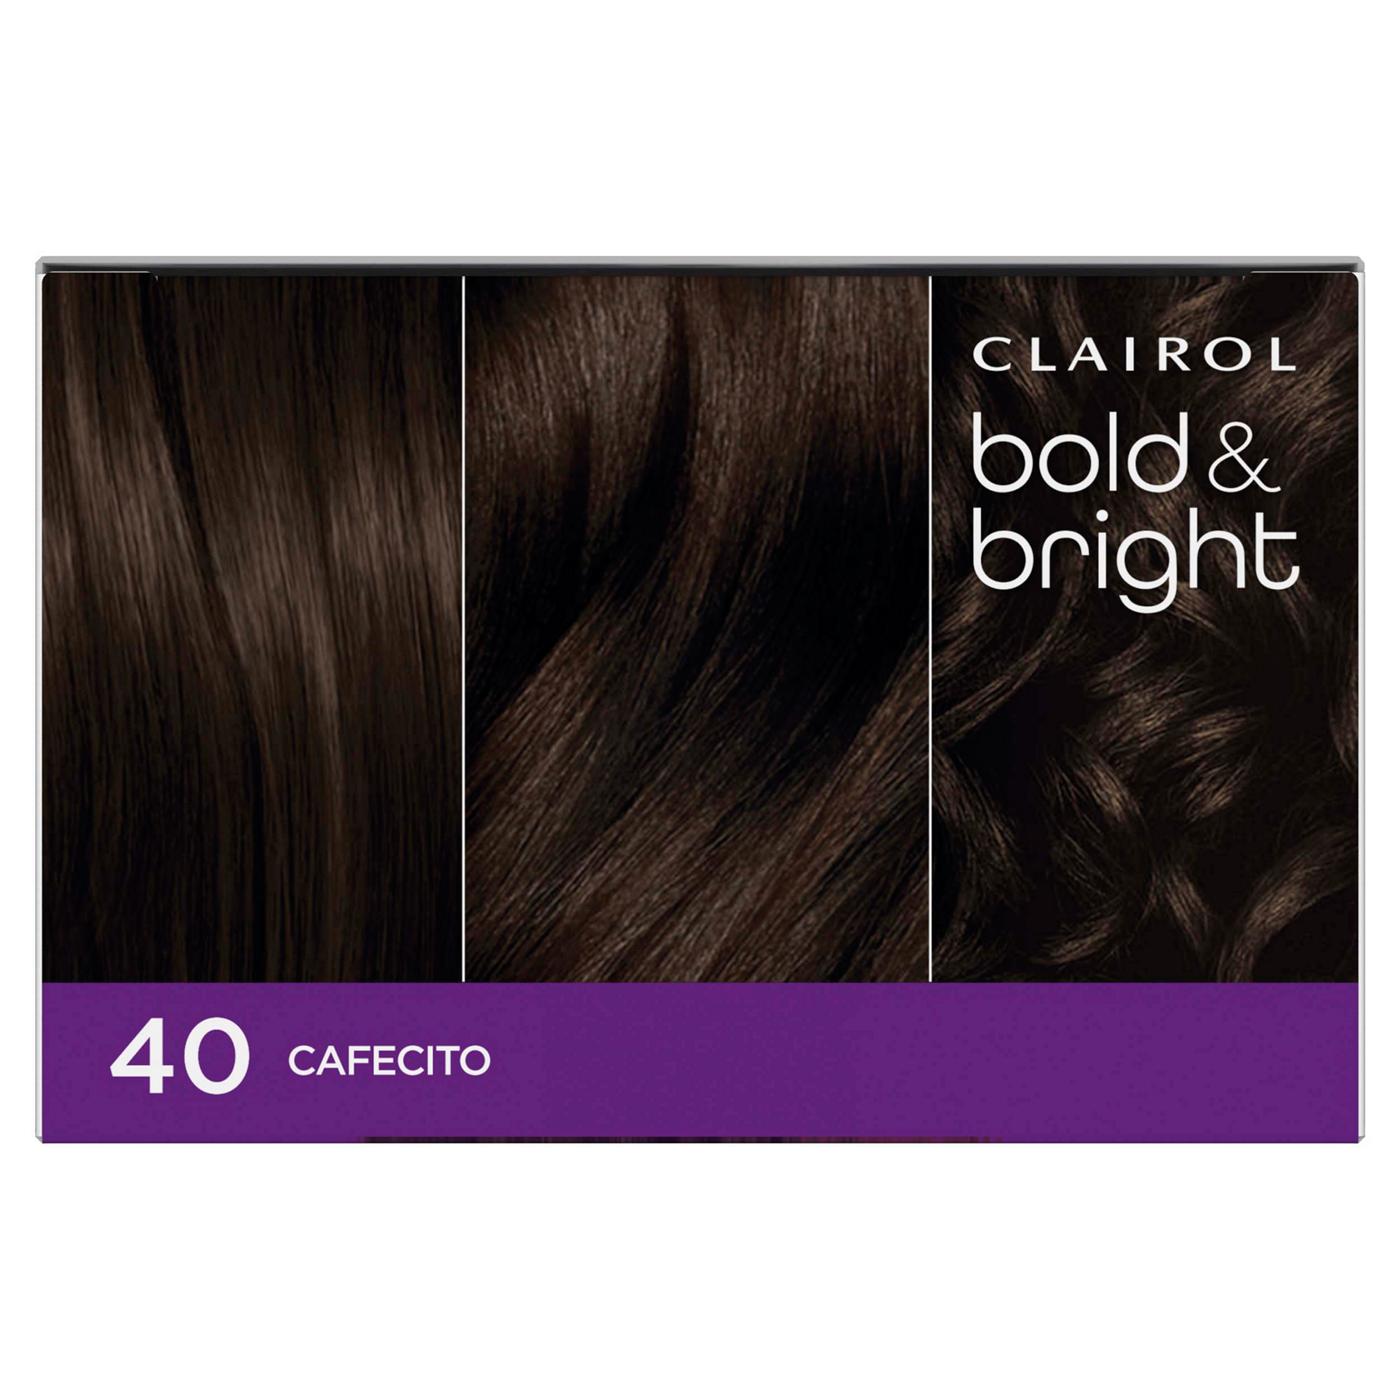 Clairol Bold & Bright Permanent Hair Color - 40 Cafecito; image 5 of 11